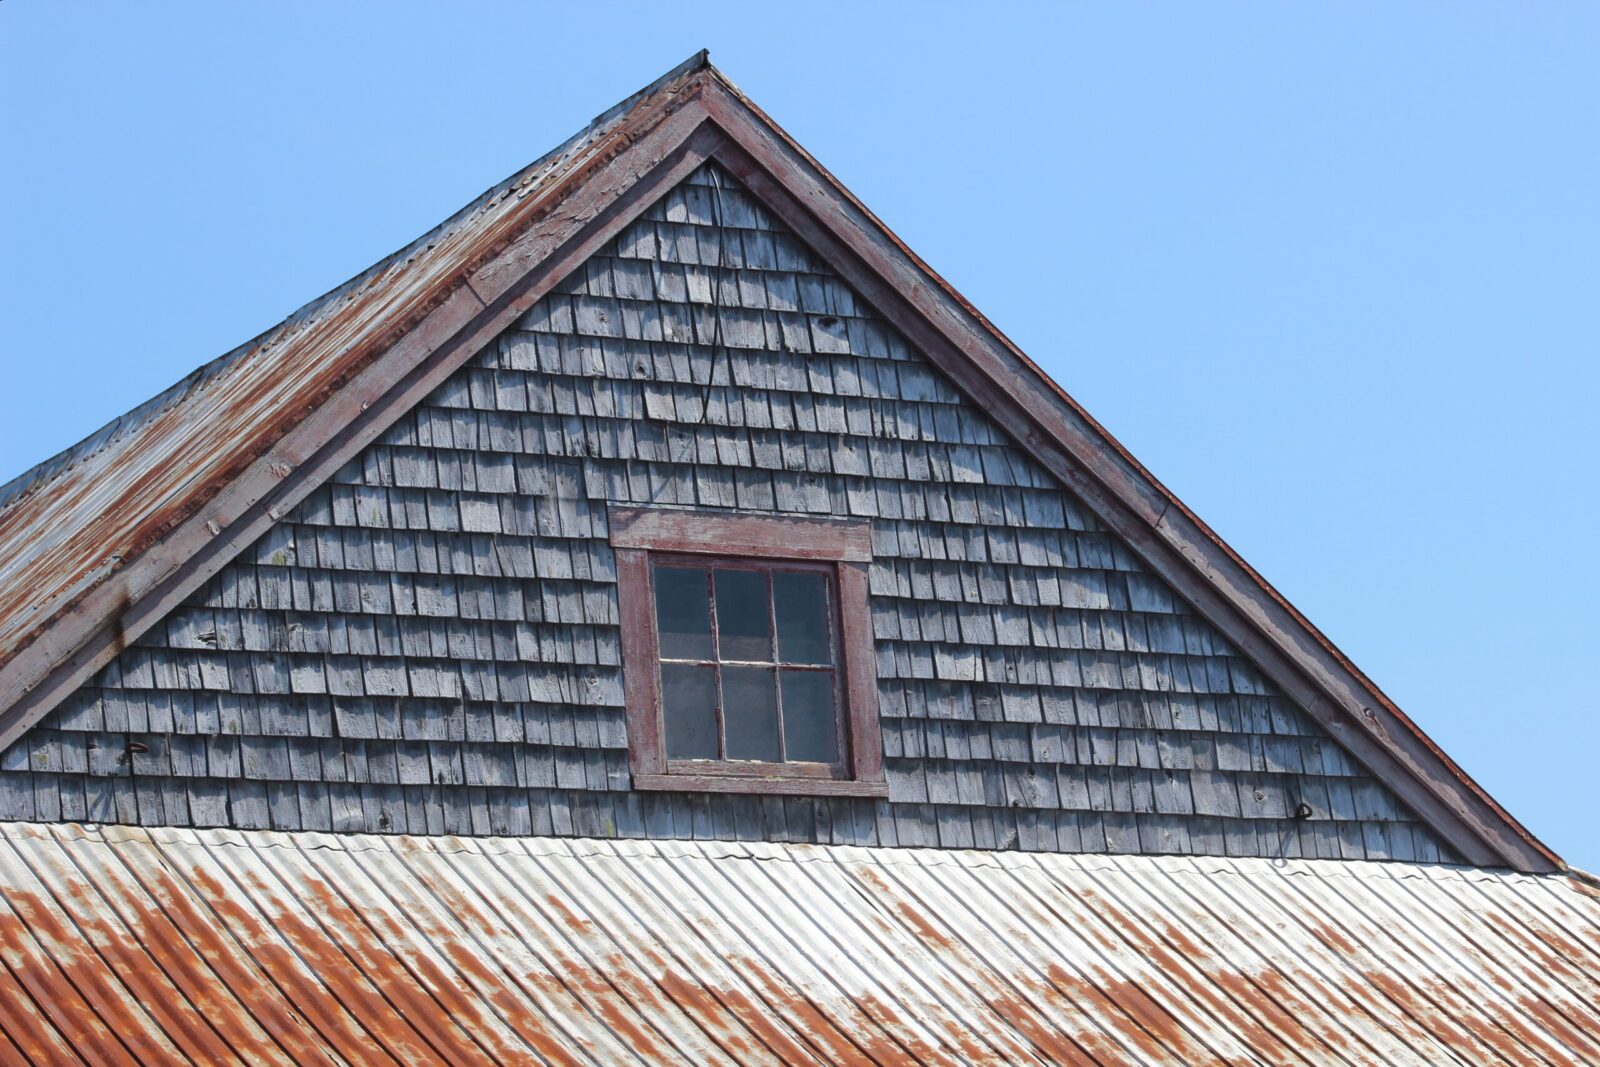 A rusty tin roof with a window.